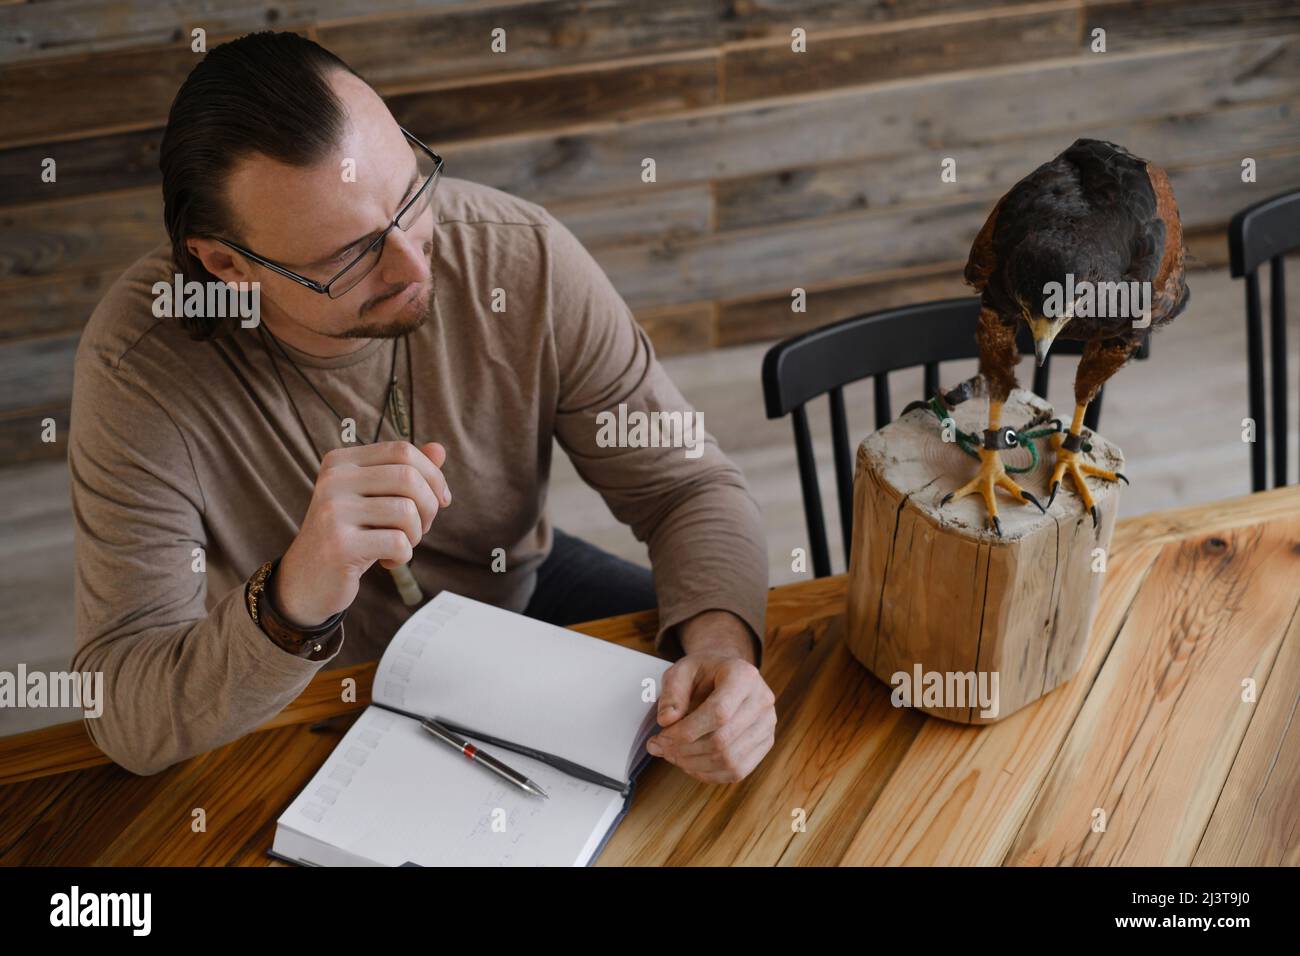 Man is working, writing with wild bird at home by the table. Making noted, memories, diary with eagle as pet. Unusual animals at home. Human Stock Photo